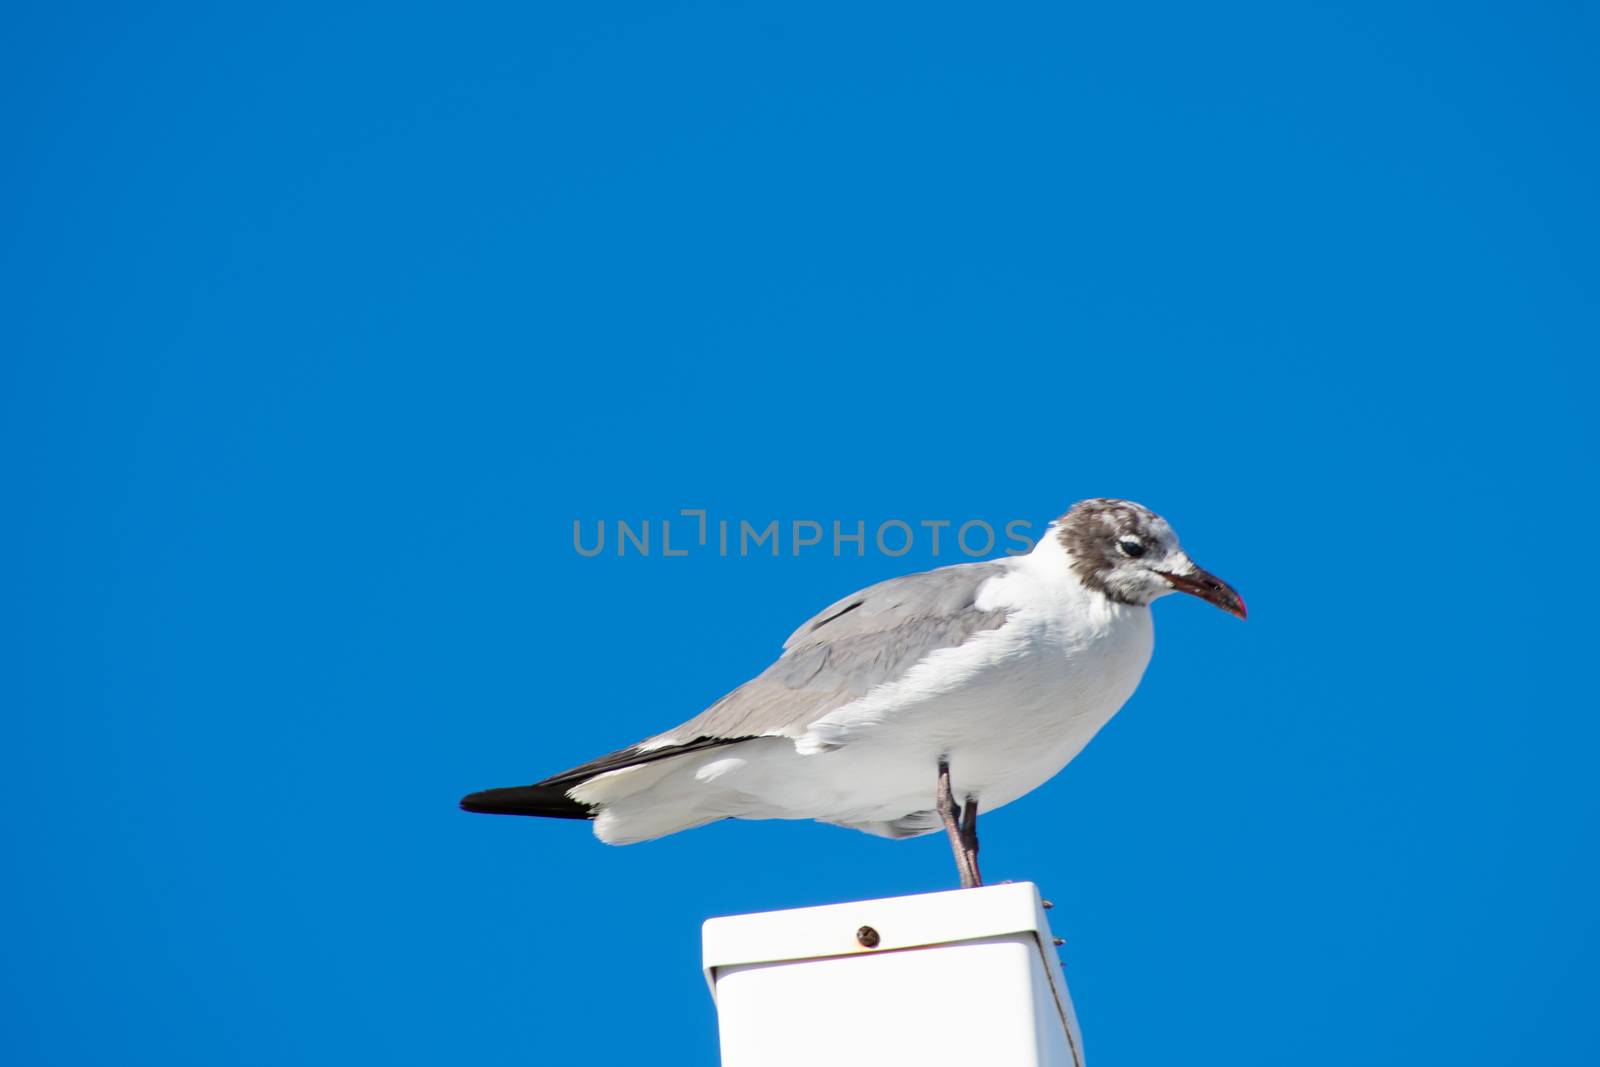 A Seagull Standing on a White Post With a Solid Blue Background by bju12290